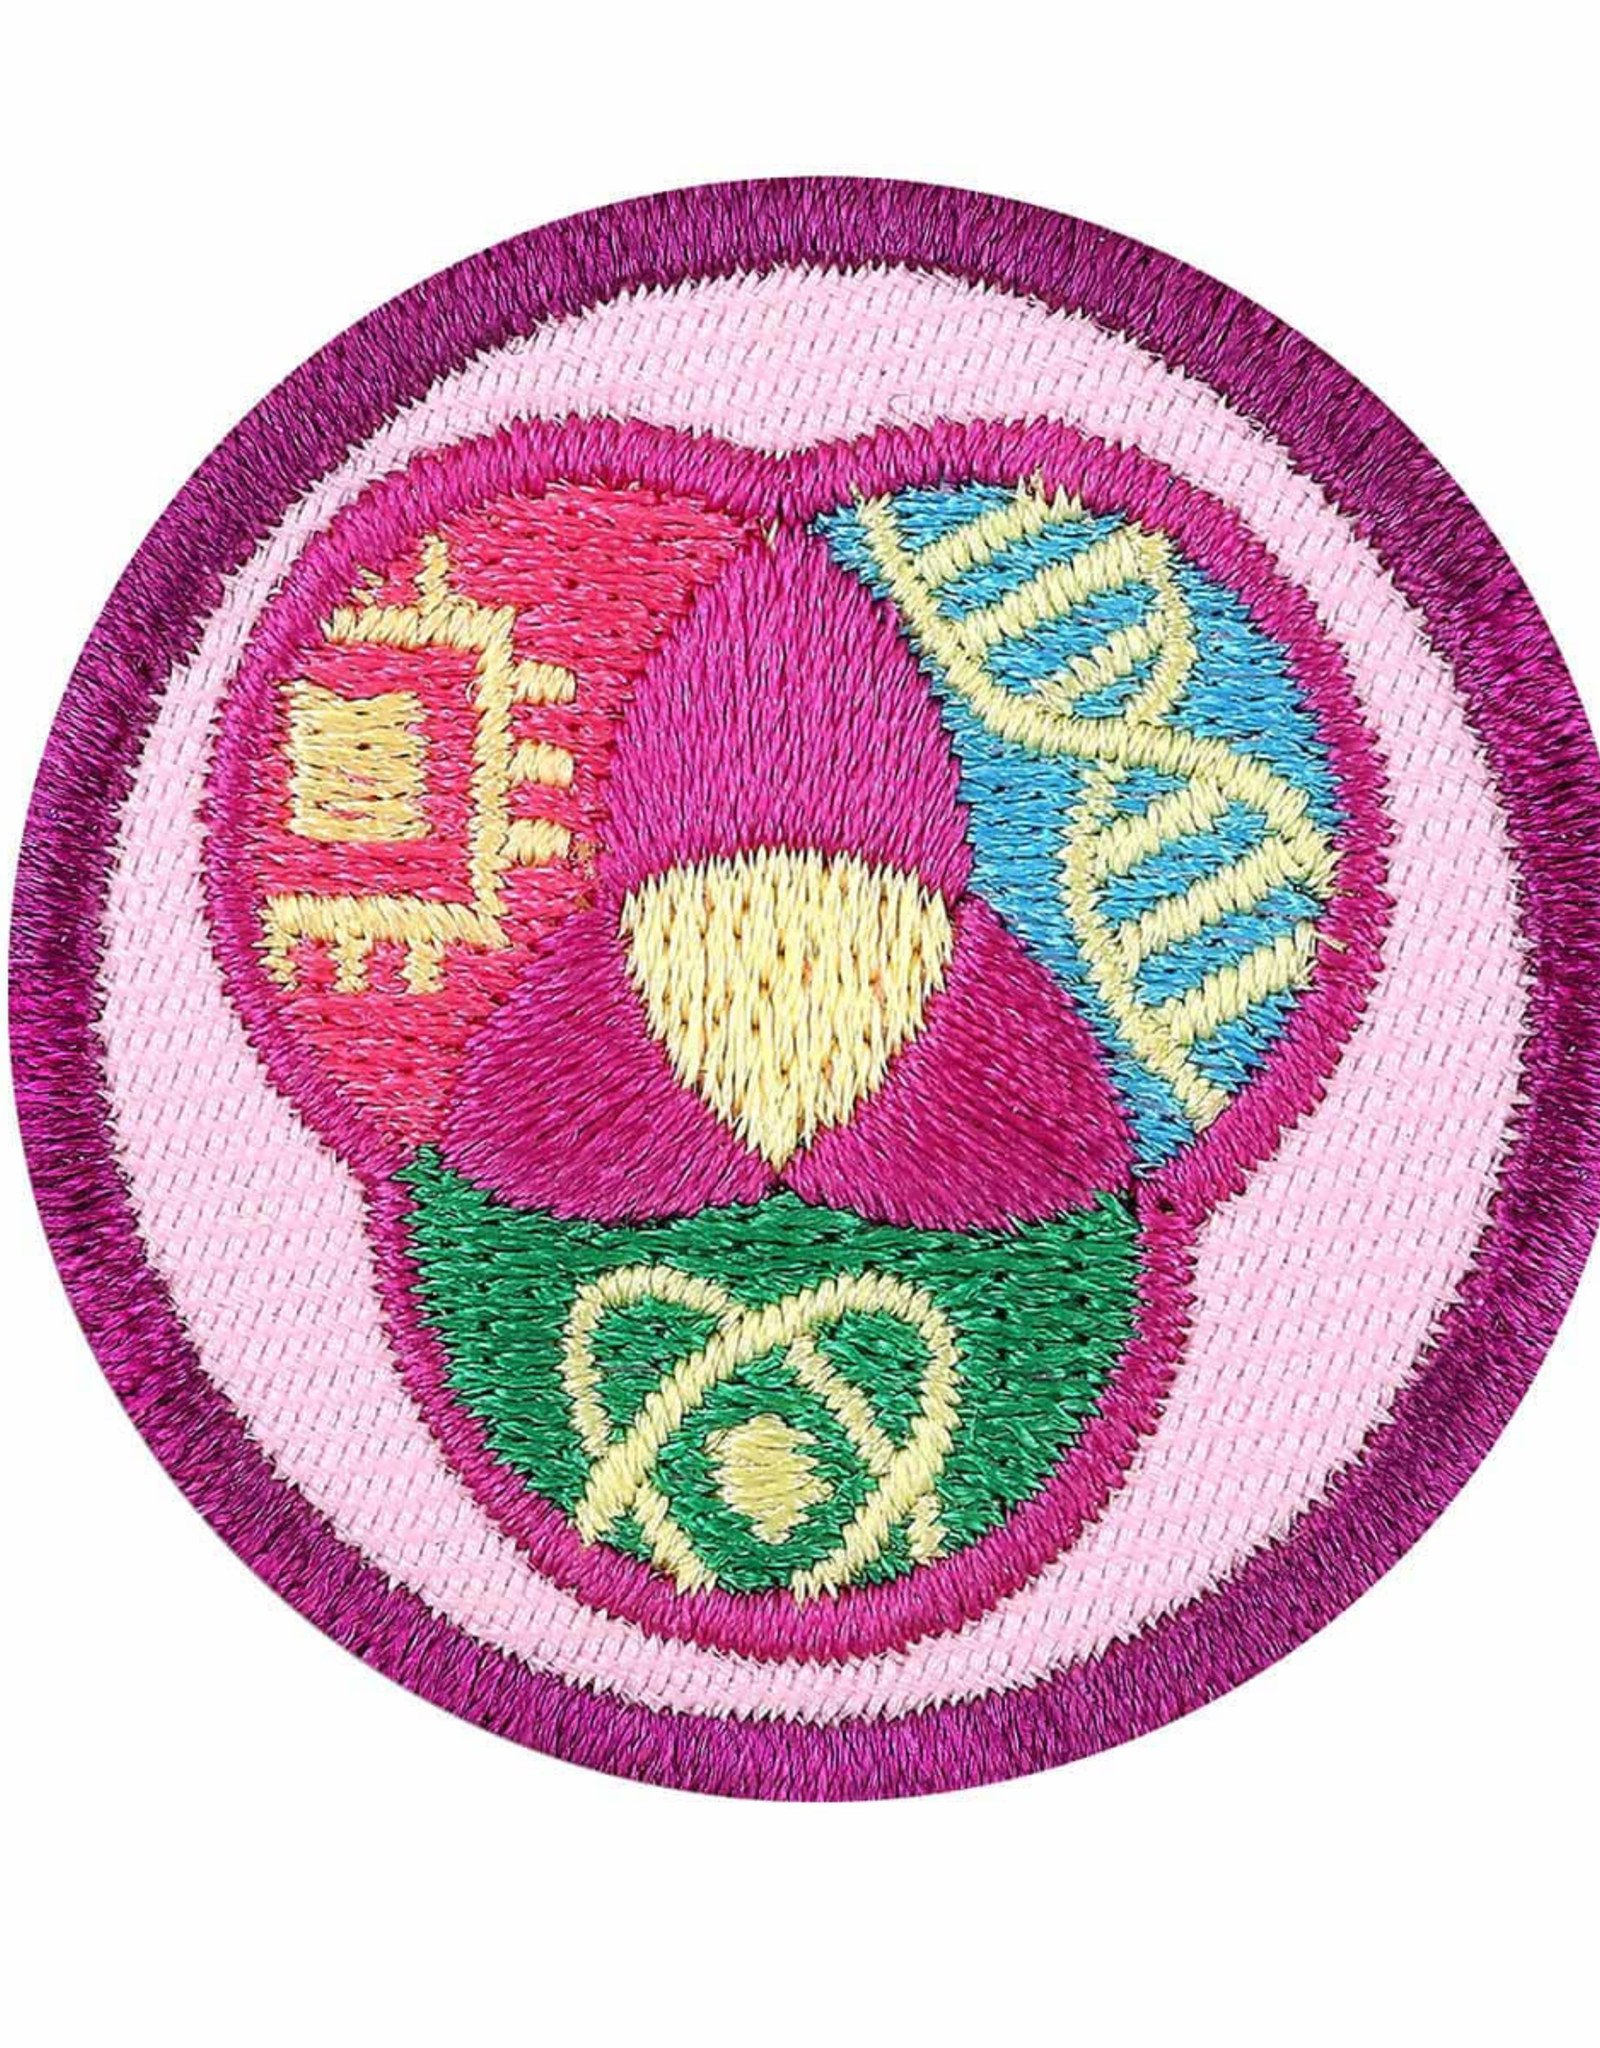 GIRL SCOUTS OF THE USA Junior STEM Career Exploration Badge